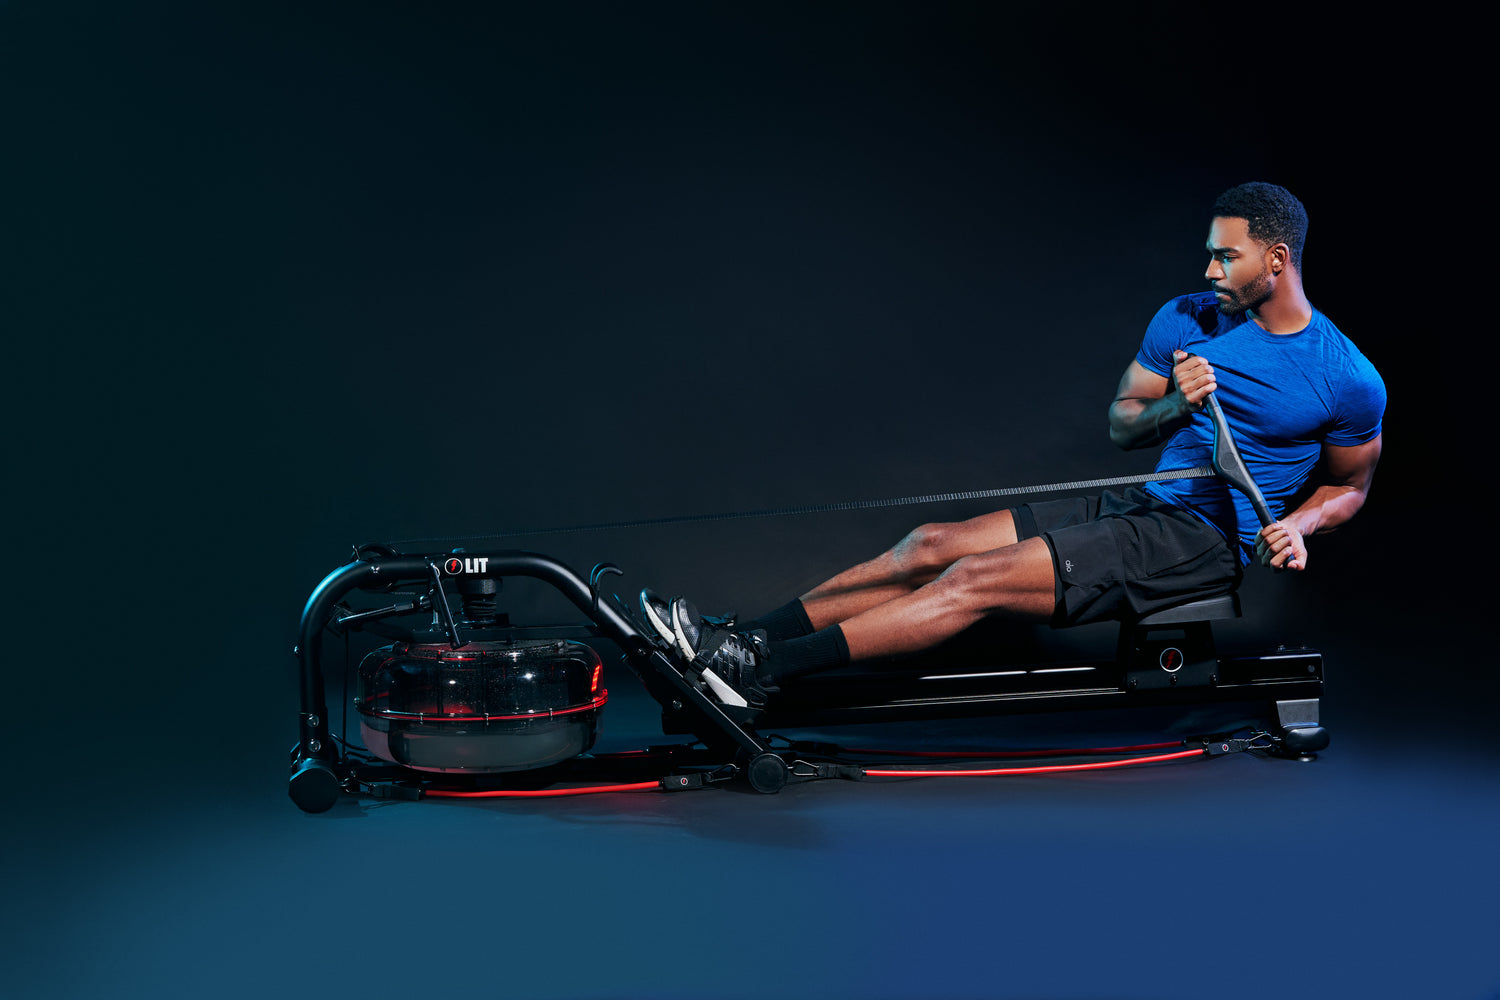 How Long Should You Row On A Rowing Machine?